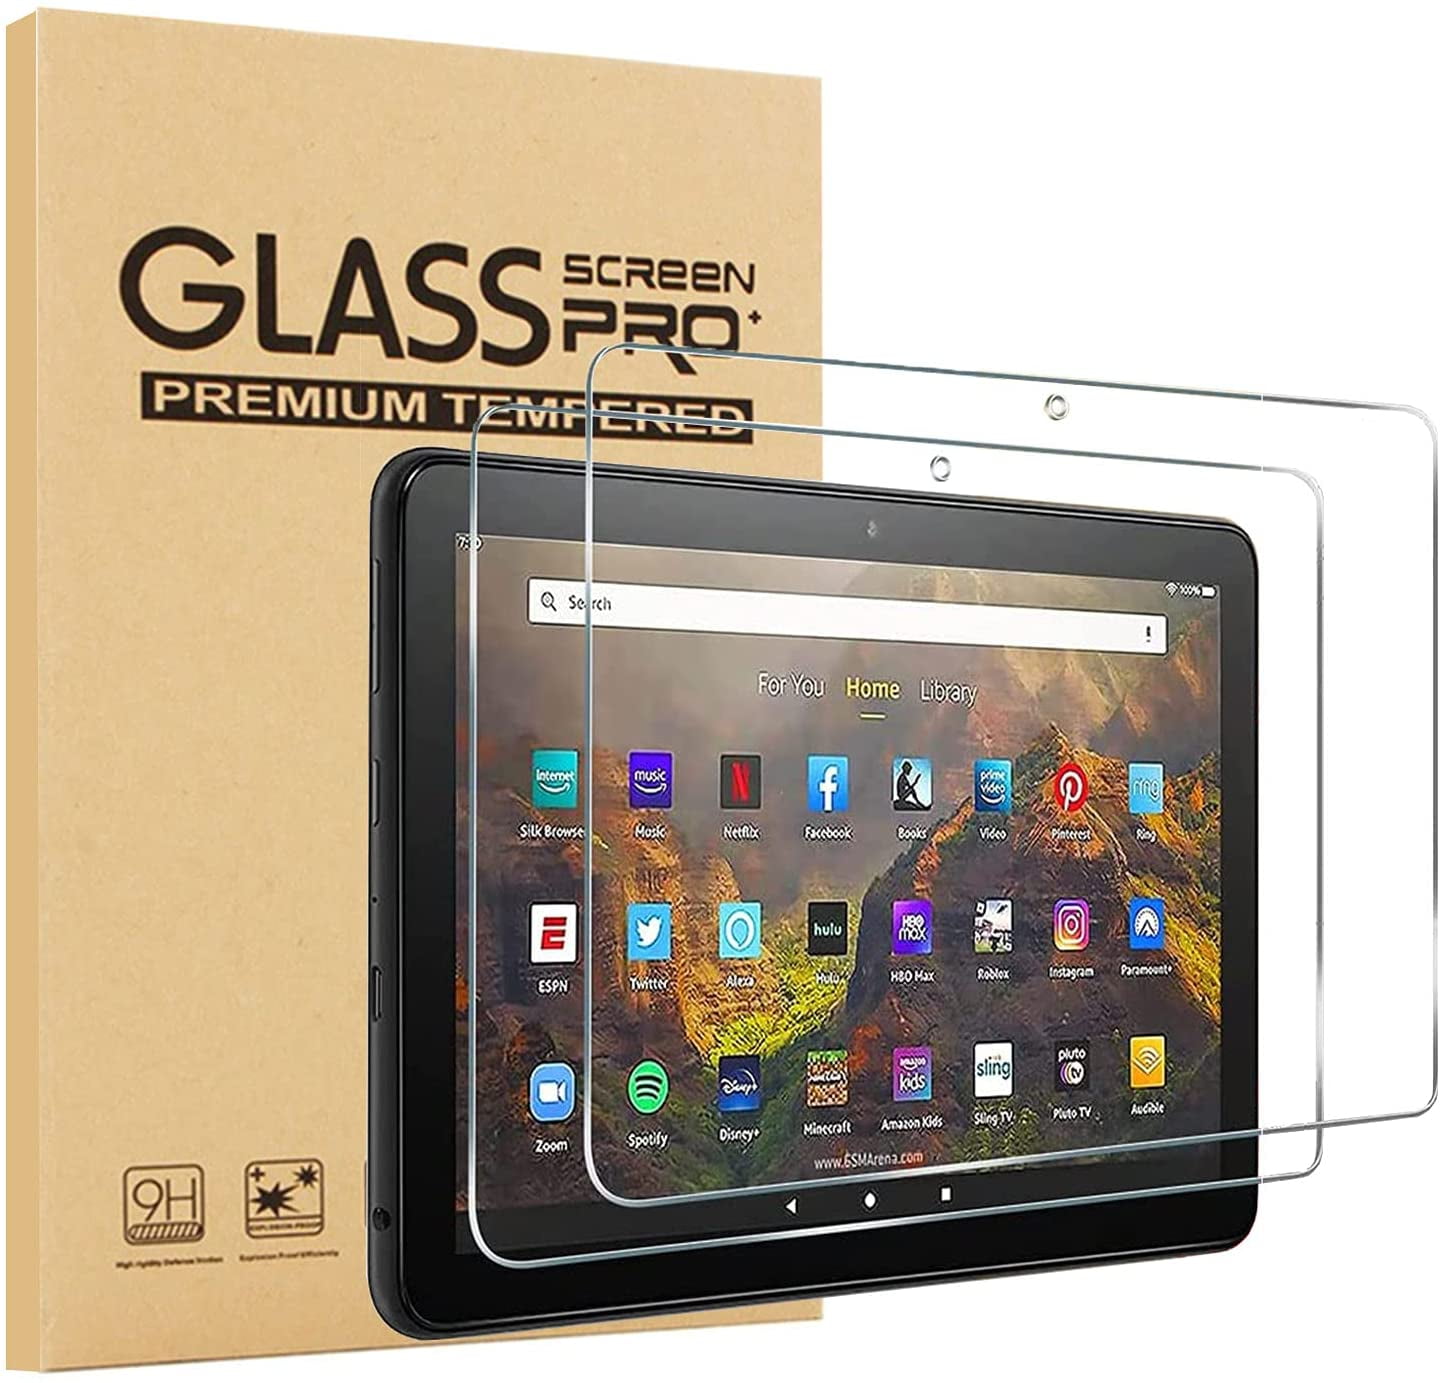 2021 Screen Protector Amazon 2 Pk Tempered Glass for Amazon Kindle Fire HD 10 & HD 10 